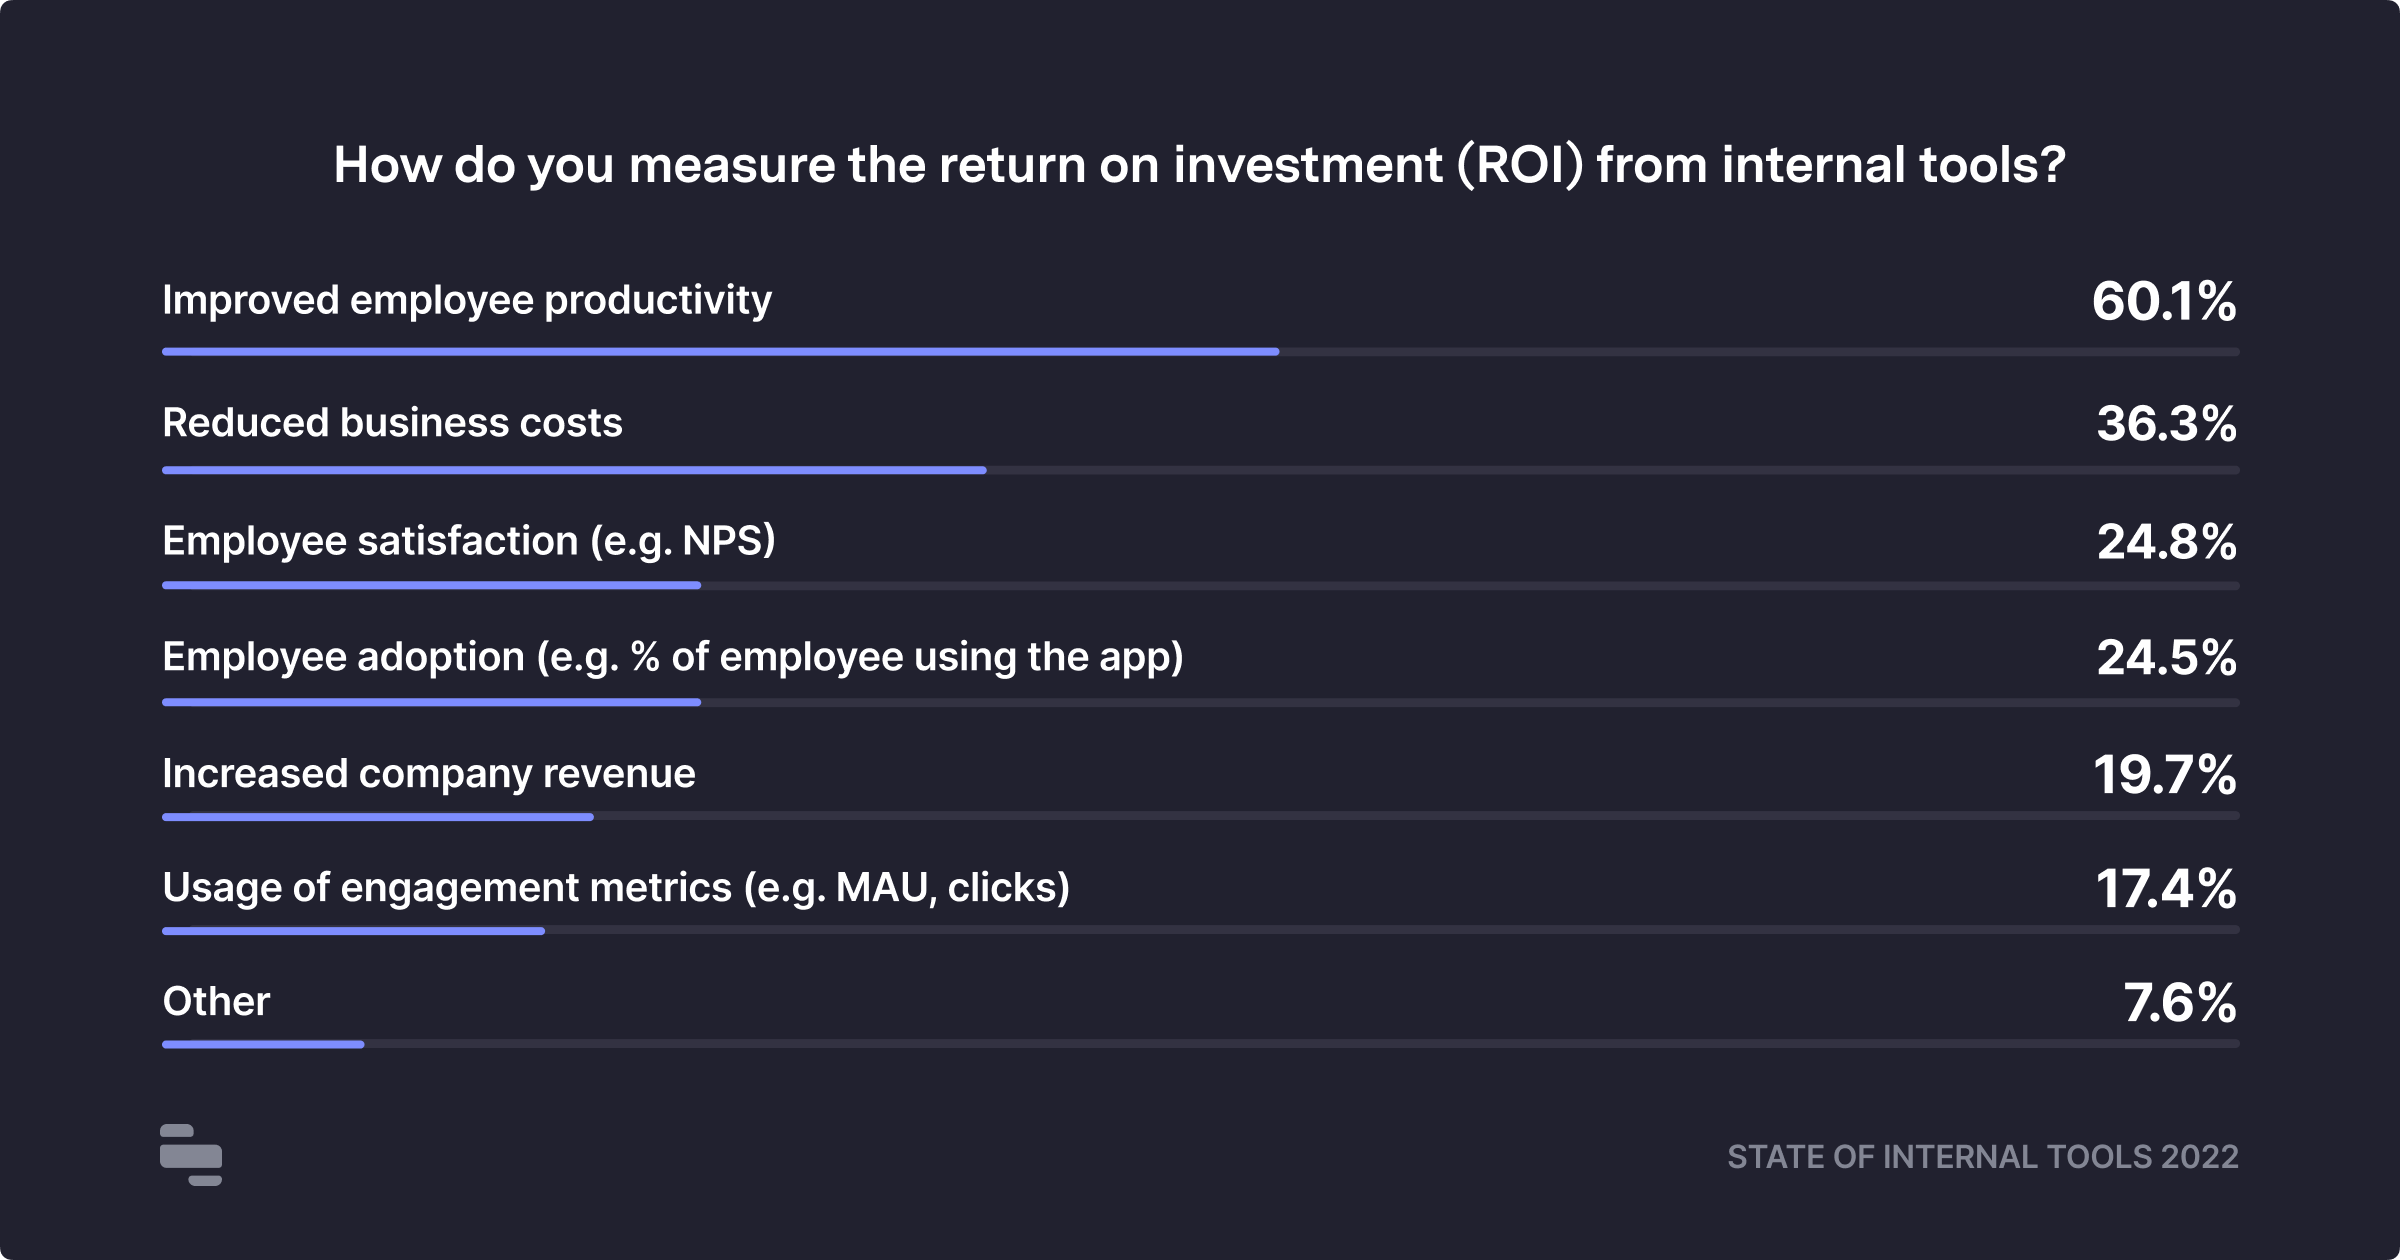 SOITS 2022 - How do you measure the return on investment (ROI) from internal tools